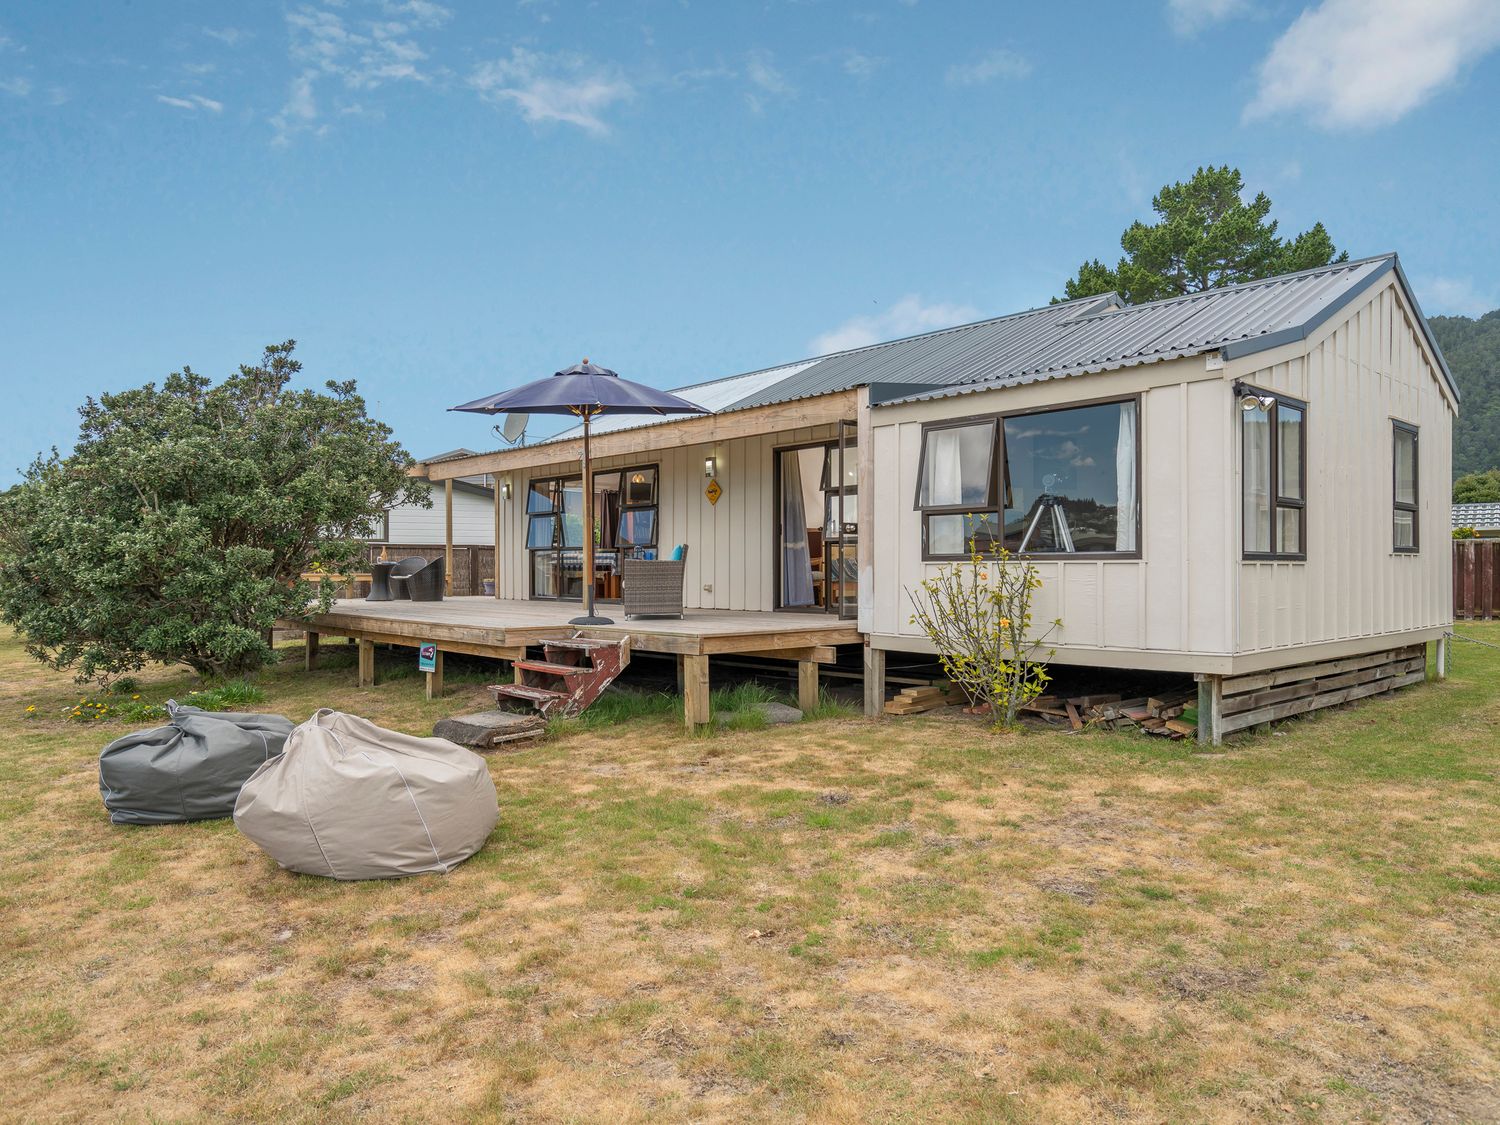 Pilots Rest - Pauanui Airfield Holiday Home -  - 1030159 - photo 1